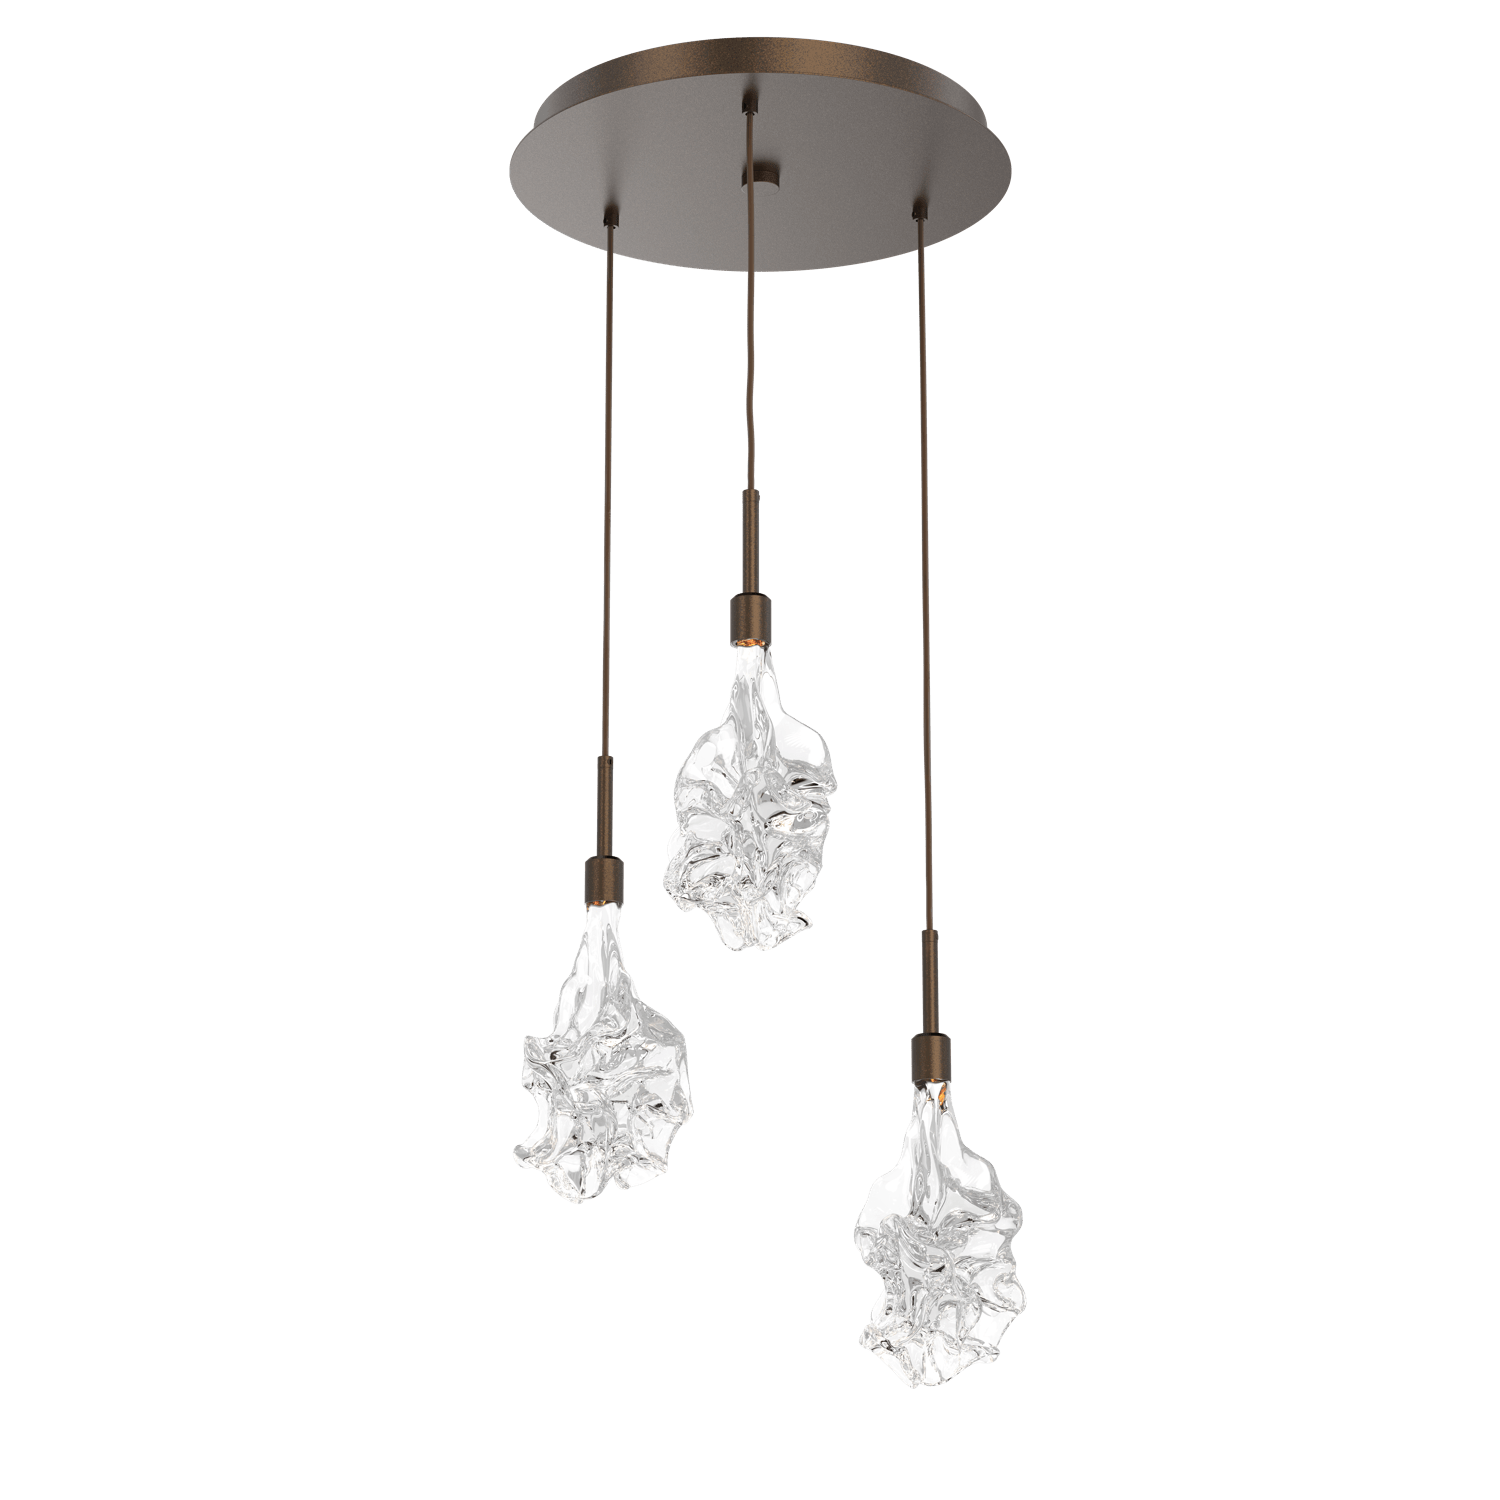 CHB0059-03-FB-Hammerton-Studio-Blossom-3-light-round-pendant-chandelier-with-flat-bronze-finish-and-clear-handblown-crystal-glass-shades-and-LED-lamping